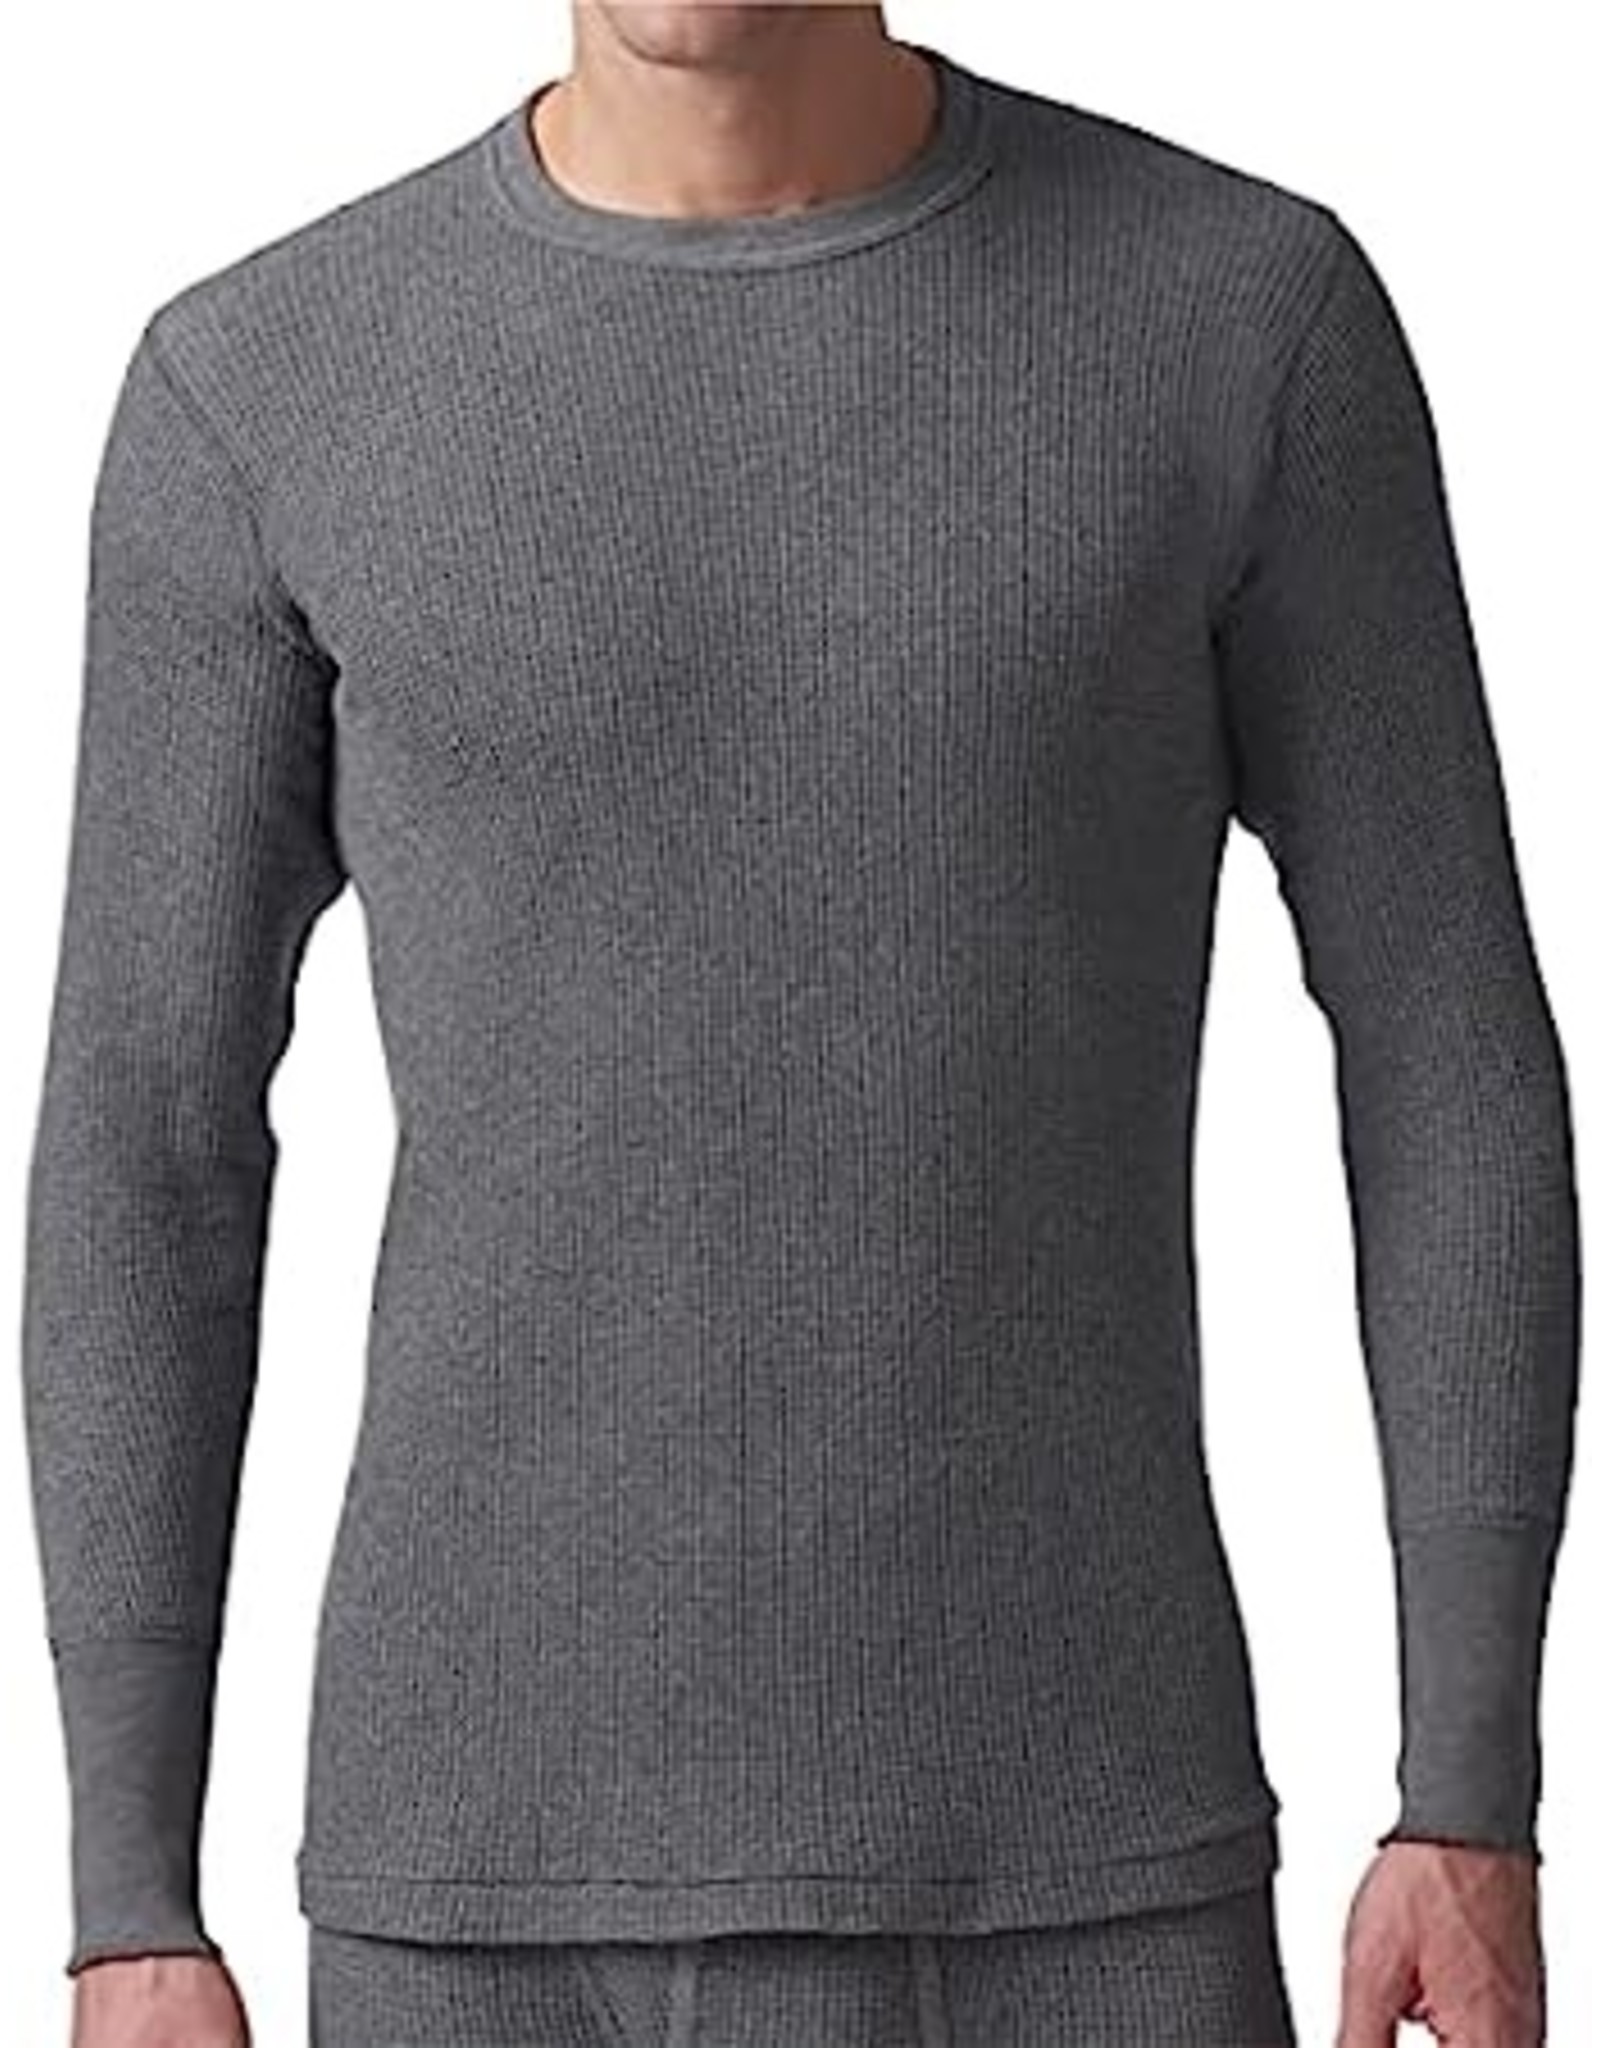 STANFIELDS MEN'S ESSENTIAL THERMAL BASE LAYER TOP